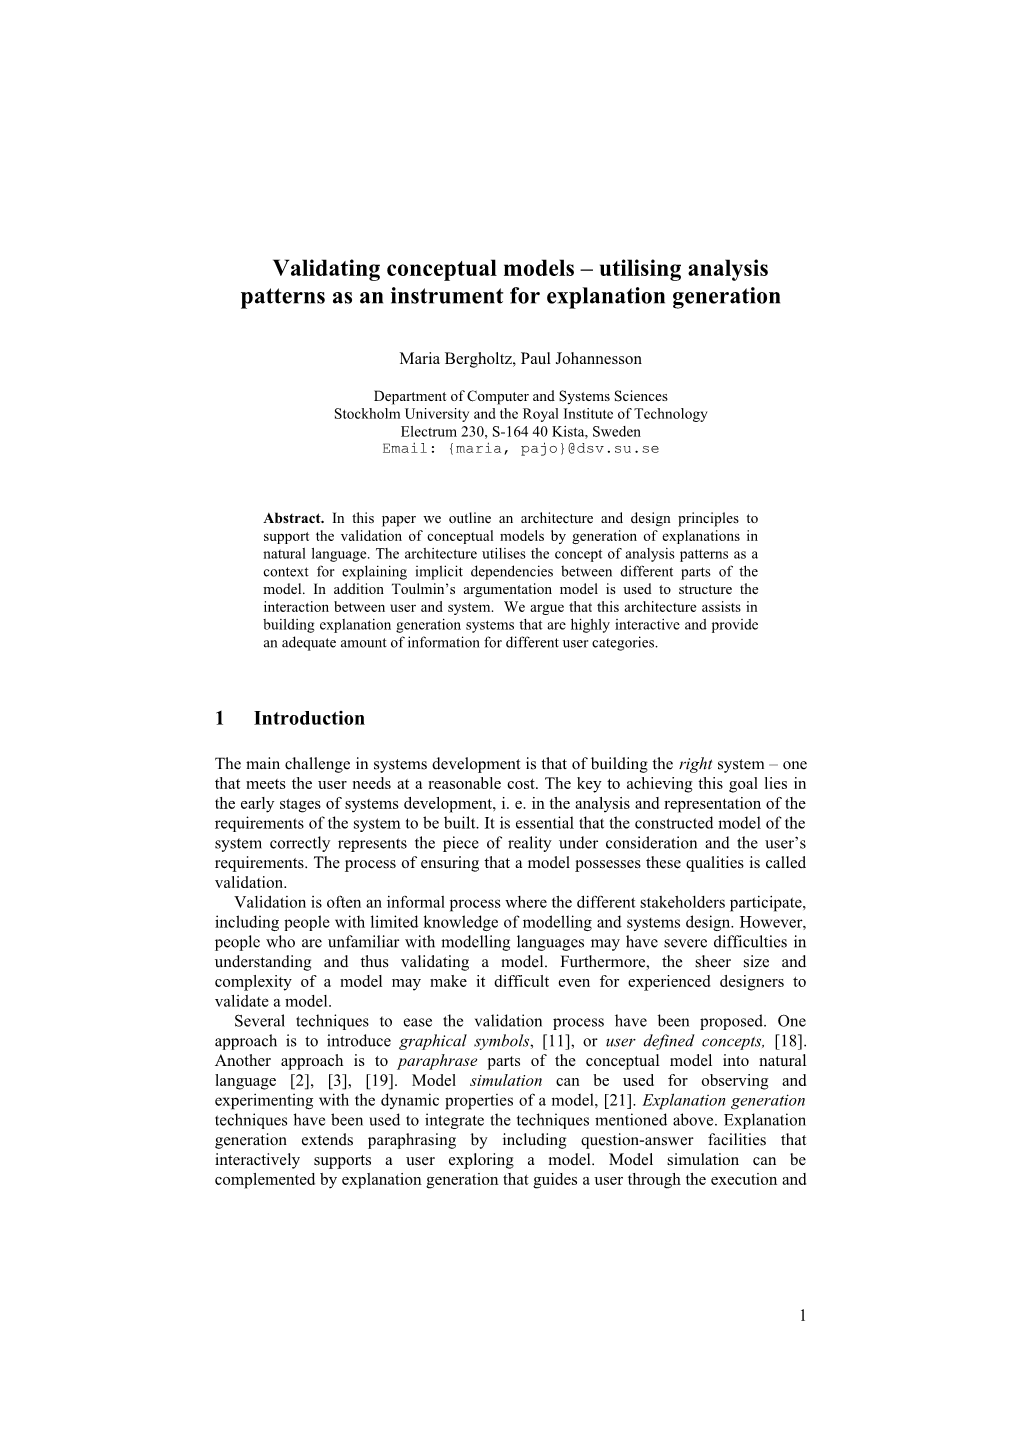 Validating Conceptual Models Utilising Analysis Patterns As an Instrument for Explanation